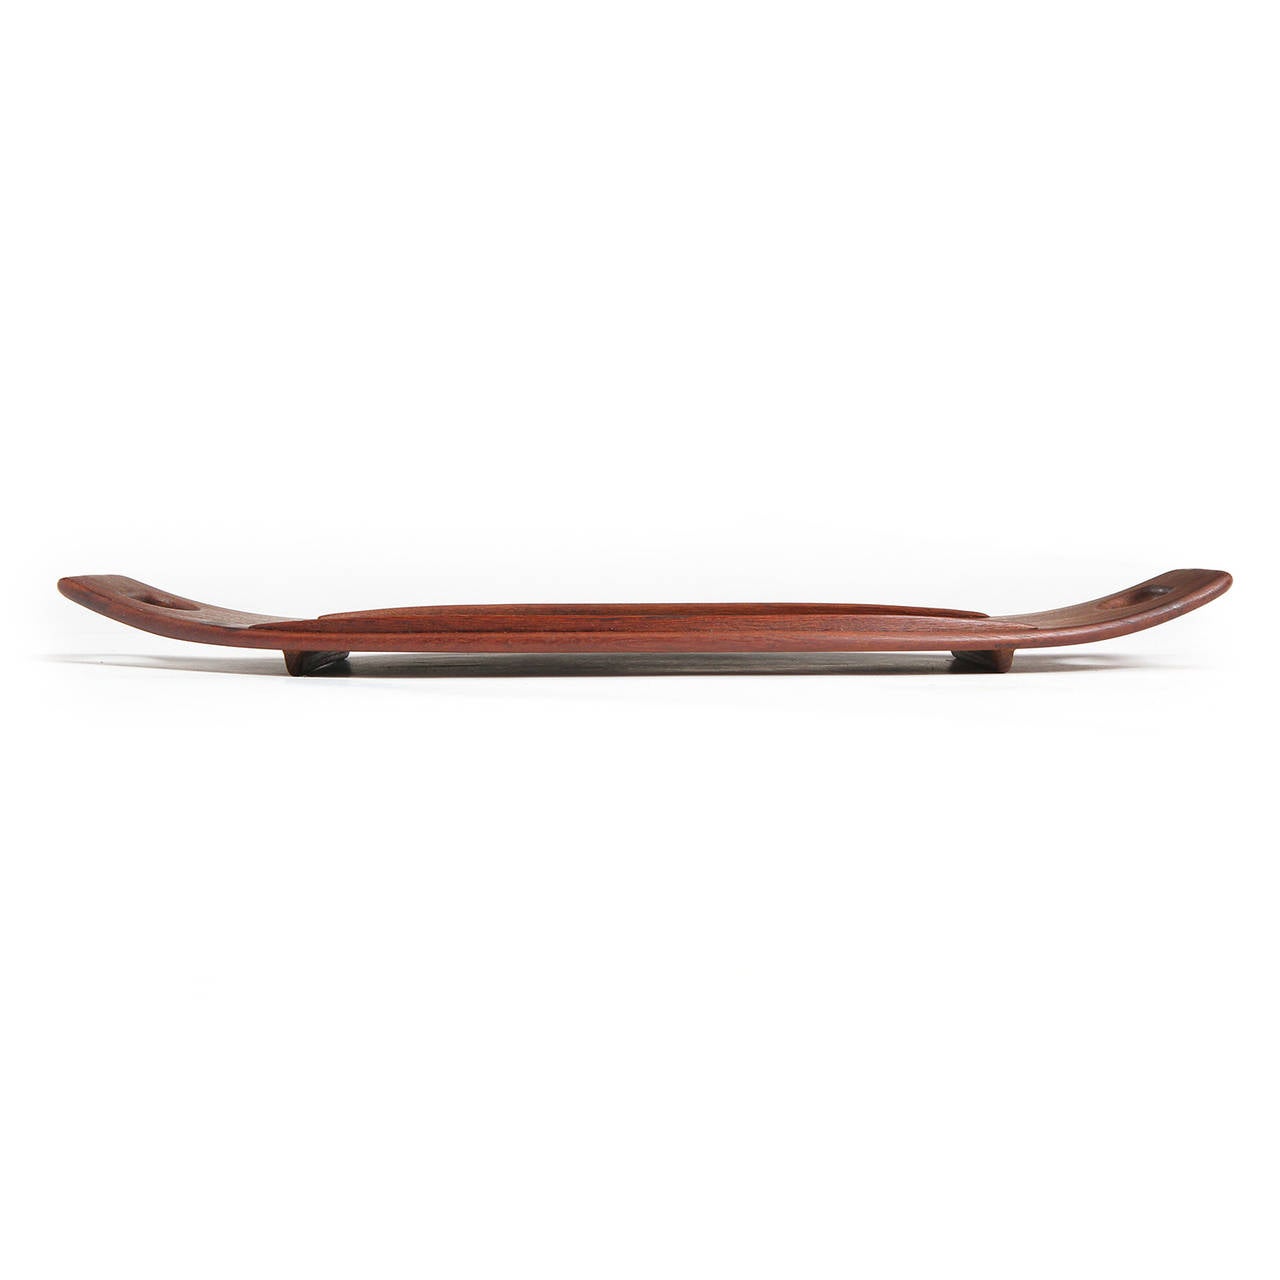 A finely crafted, elegant and uncommon railed serving tray of oblong form with upturned ends and cut out handles made from staved planks of rosewood.